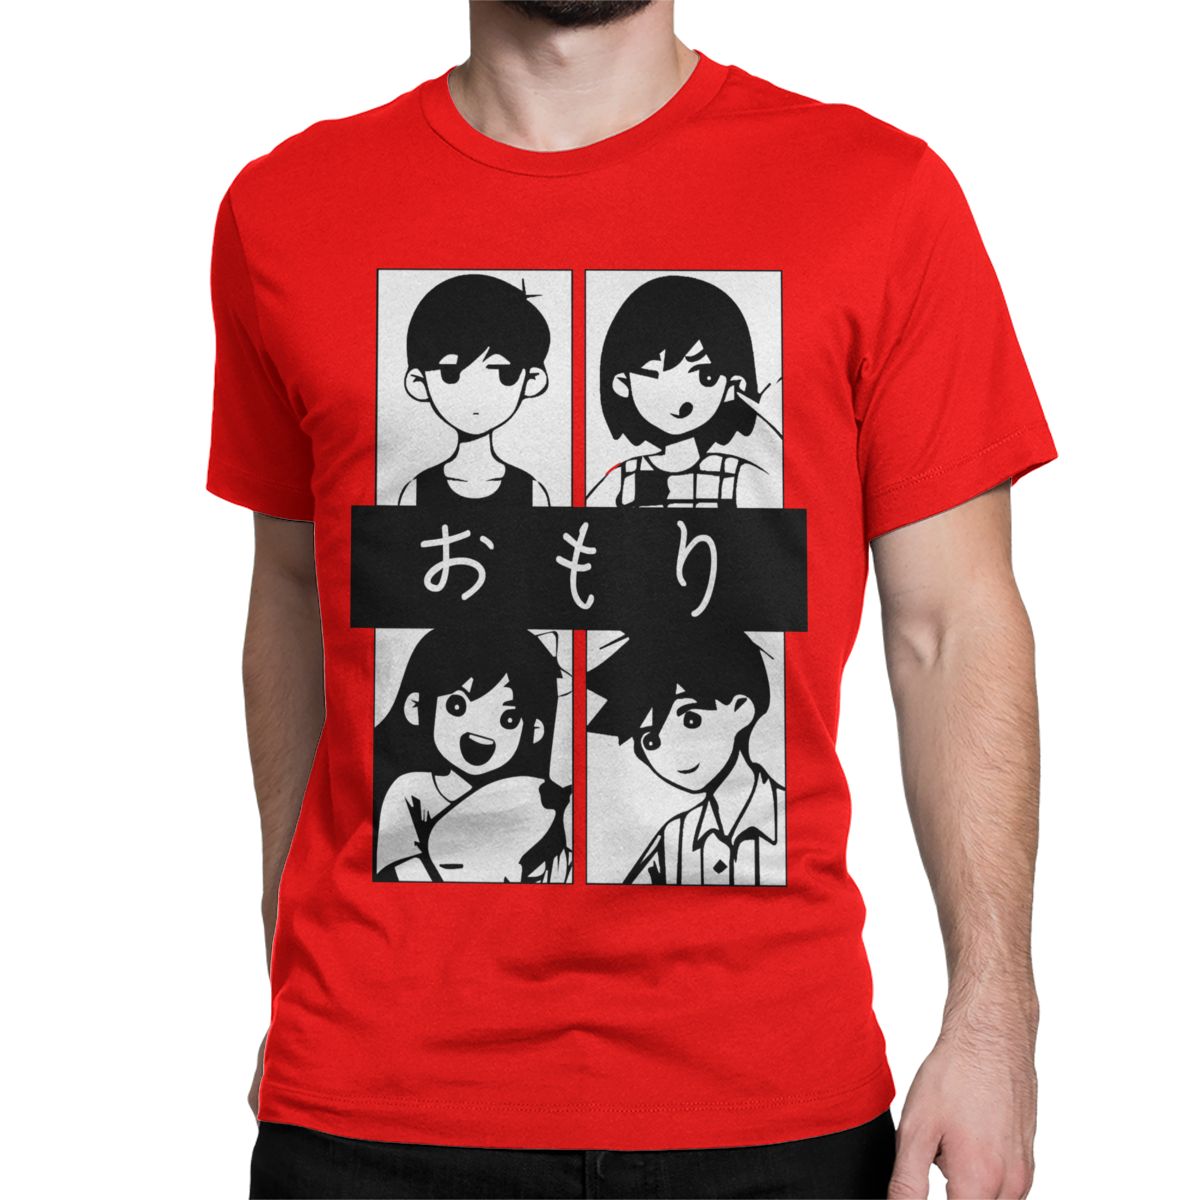 Shop in Style: Get Official Omori Merchandise from the Store